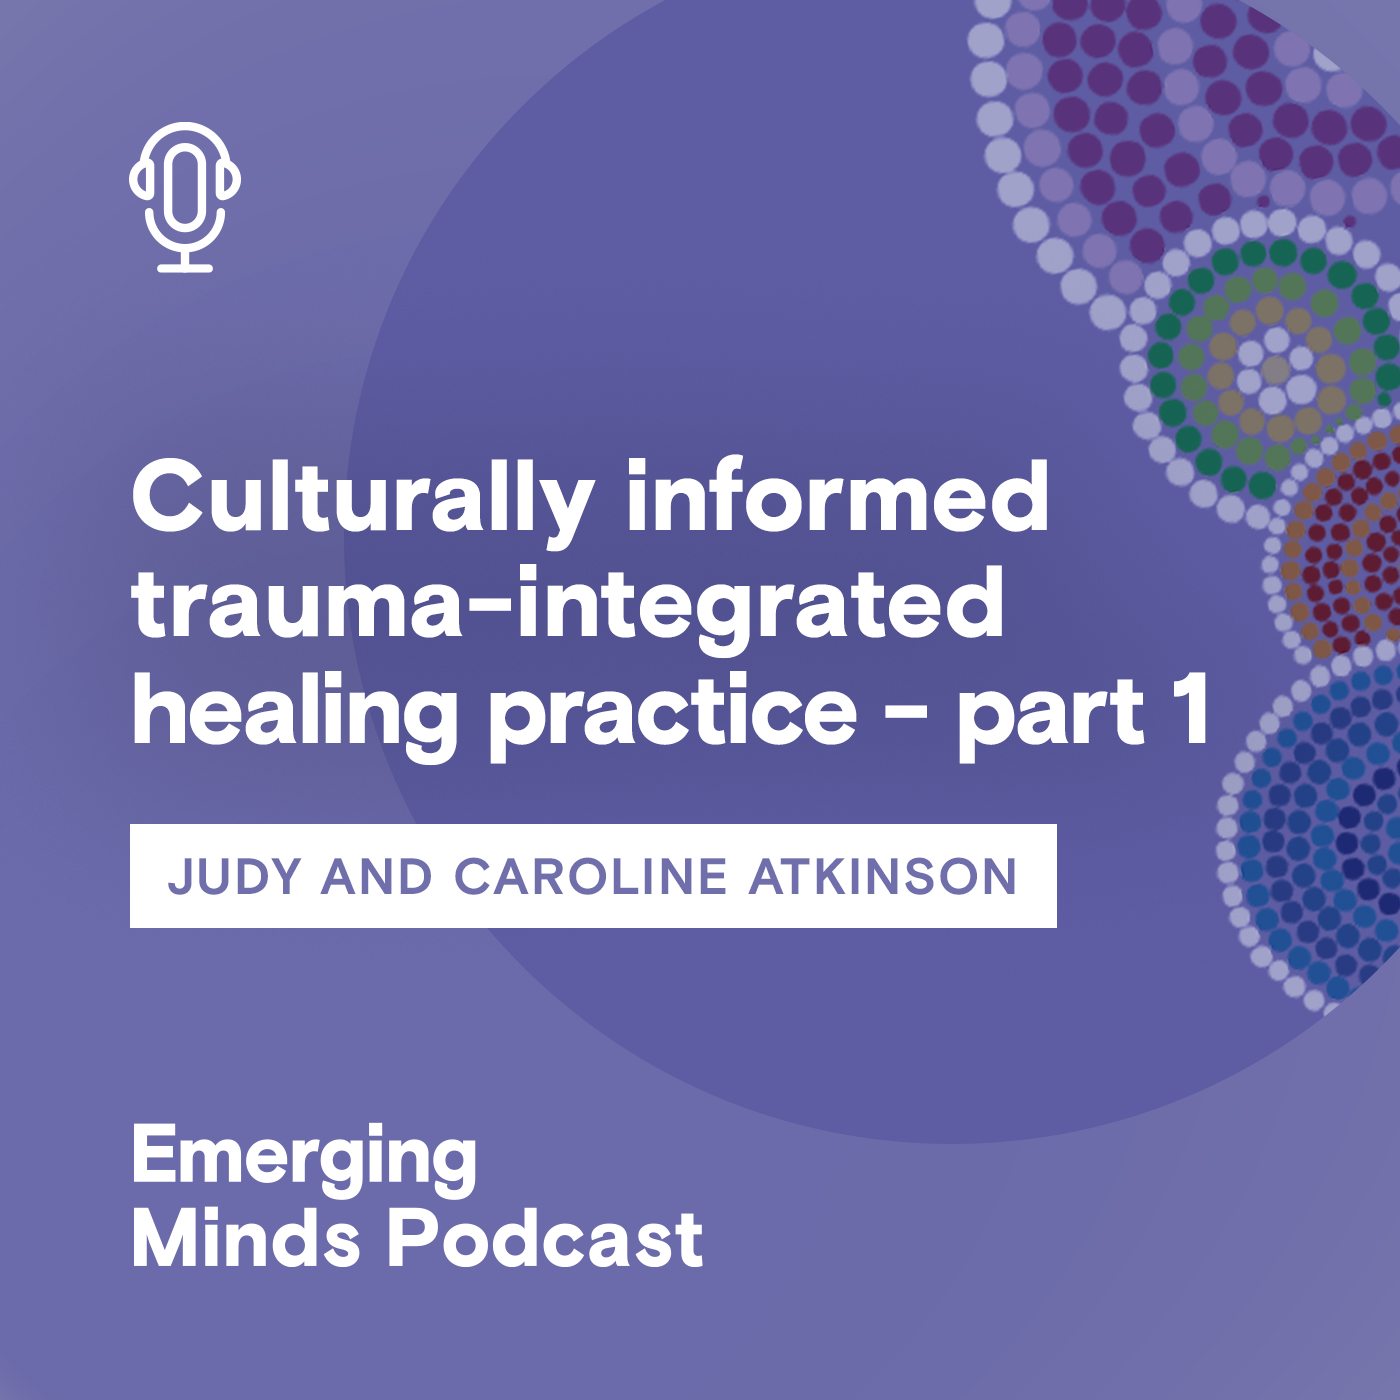 Culturally informed trauma-integrated healing practice - part 1